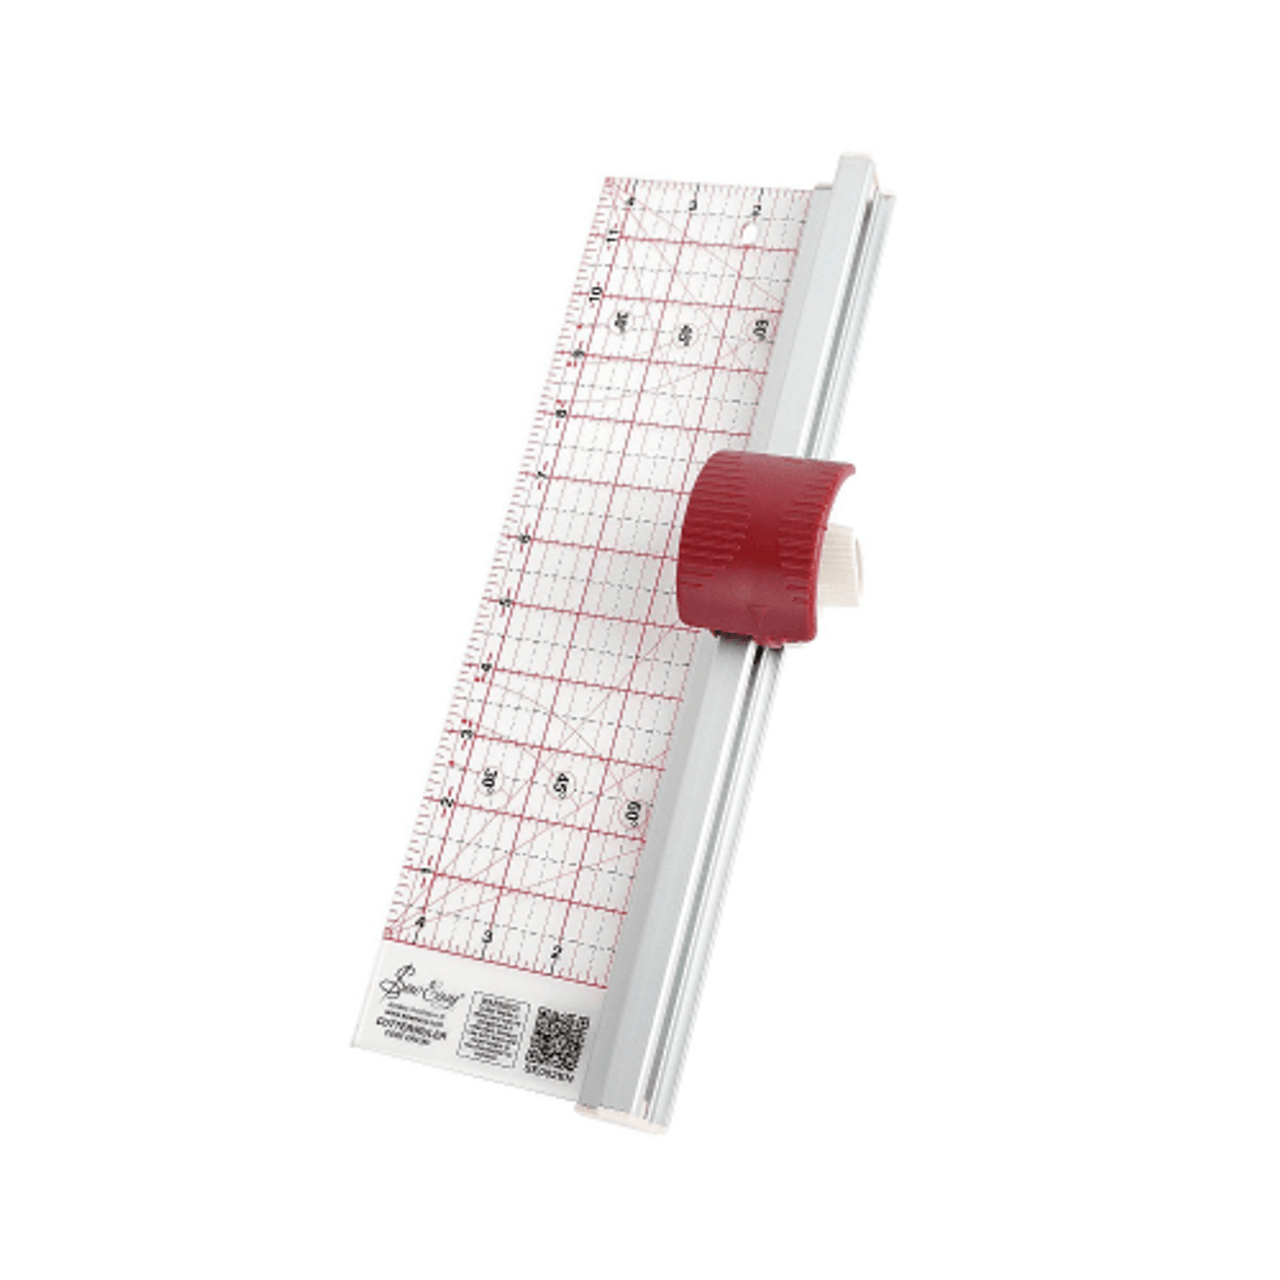 Sew Easy Ruler Cutter | Rotary Cutter and Ruler Tool 13.5" x 4.5"